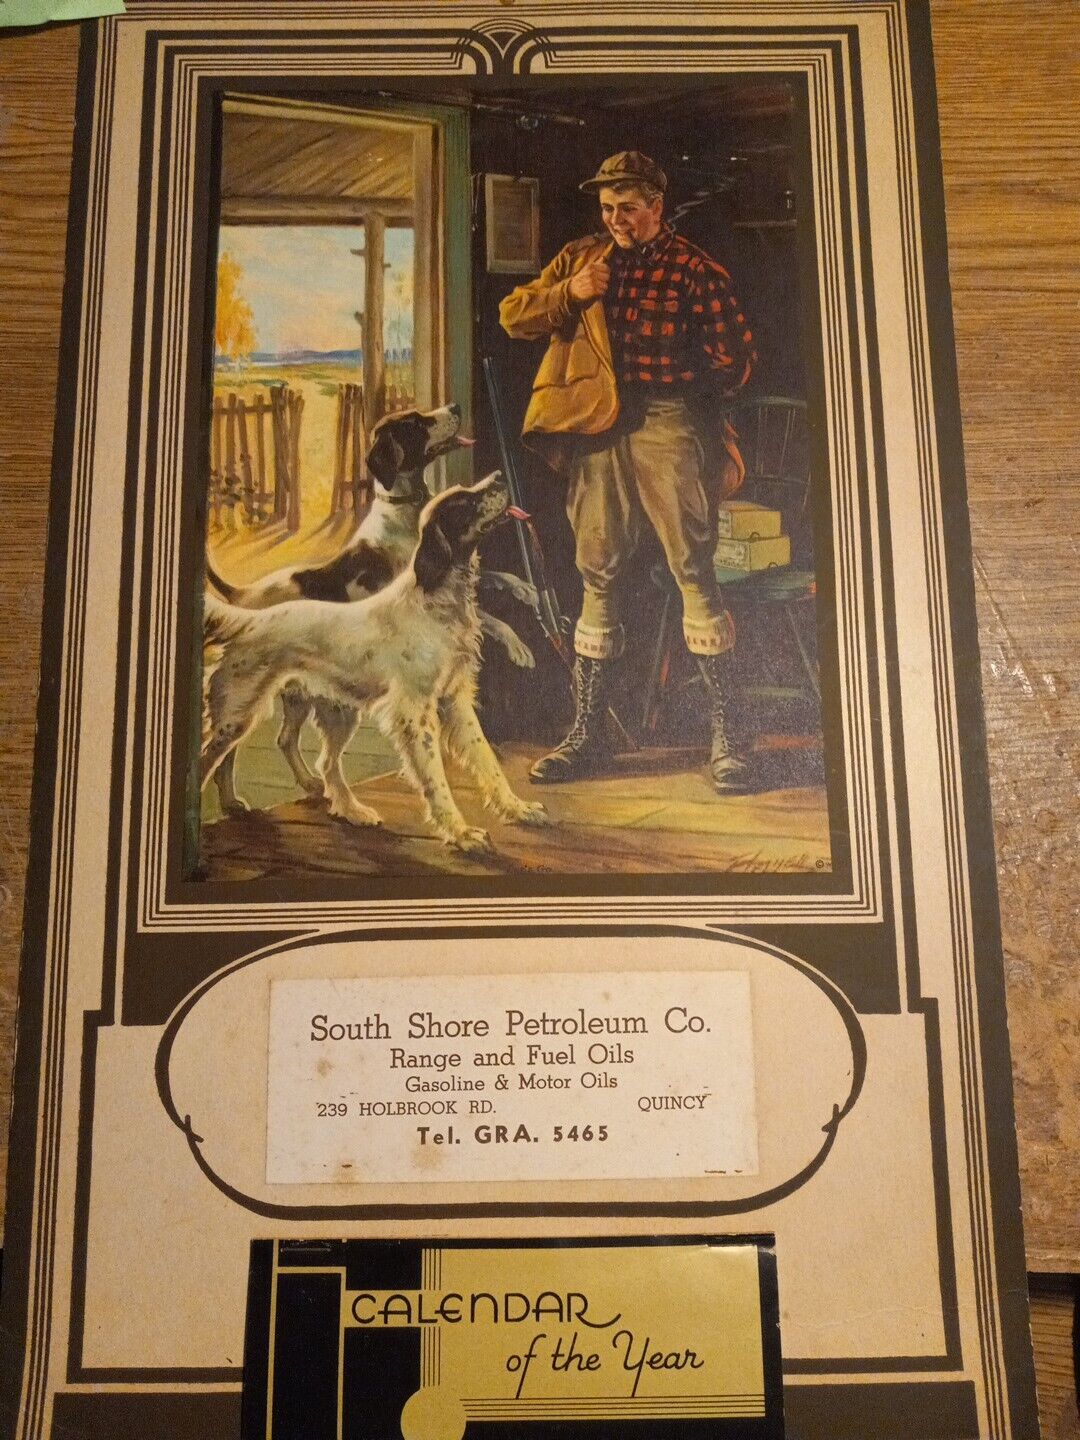 1941 calendar South Shore Petroleum Co. Quincy,Ma. hunting dogs  cabin